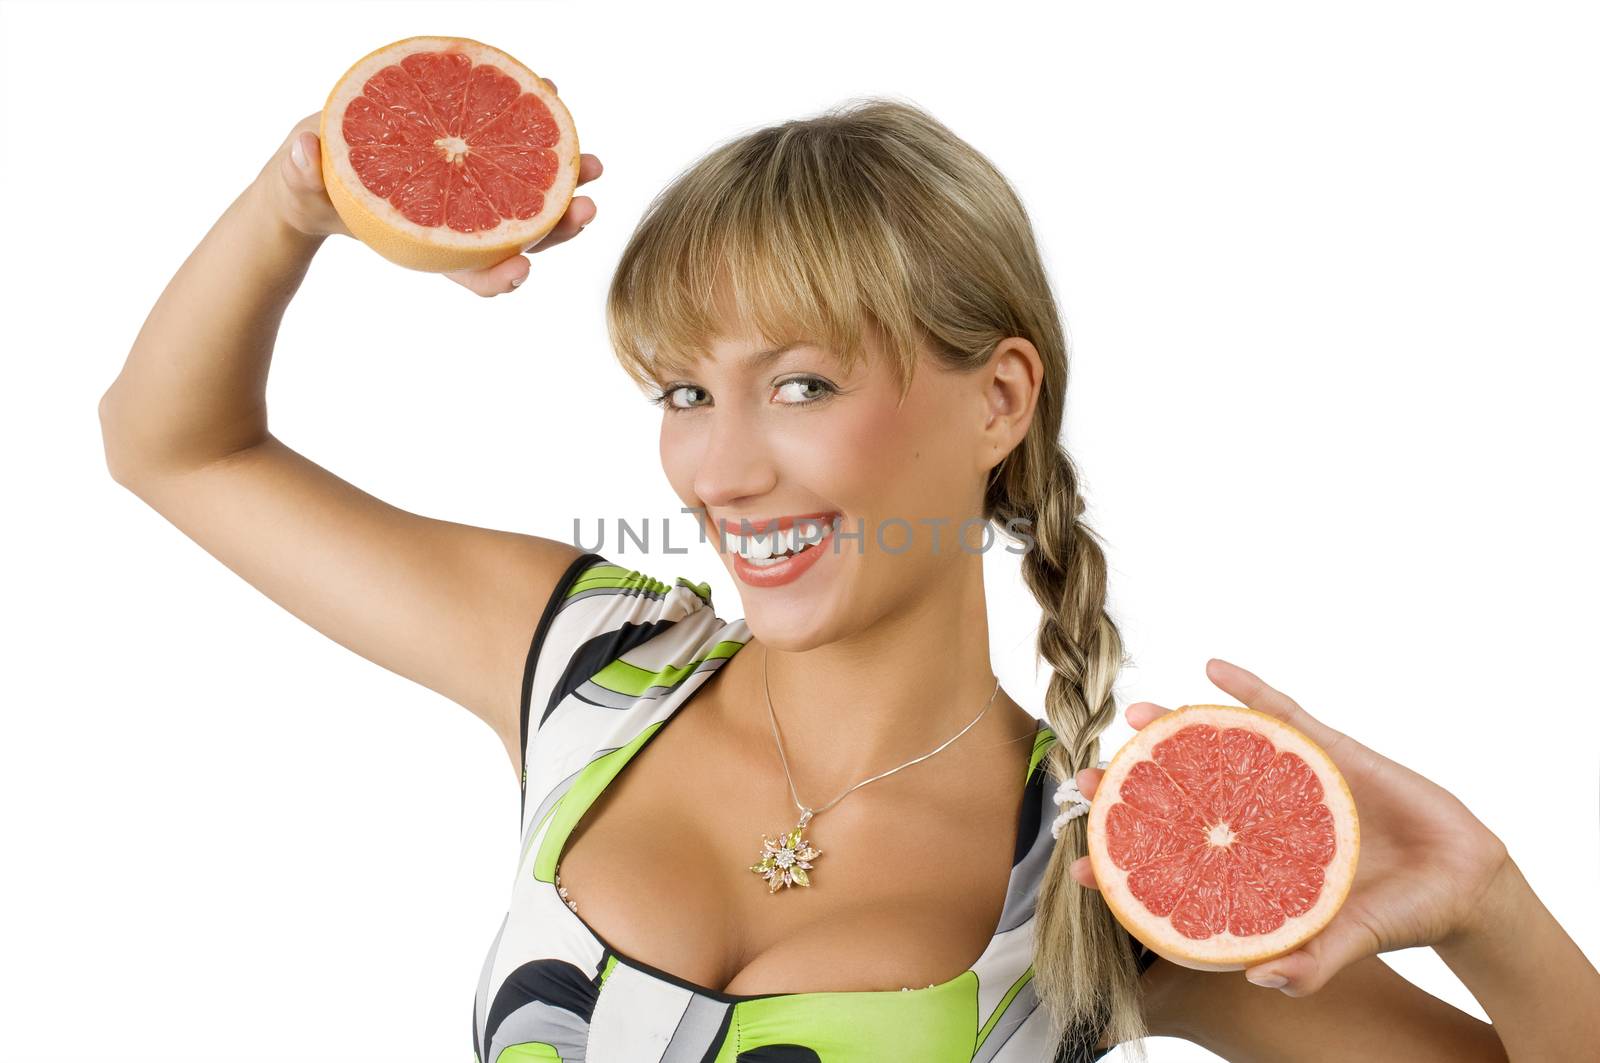 happy and smiling blon girl with green dress and two half grapefruit in hands